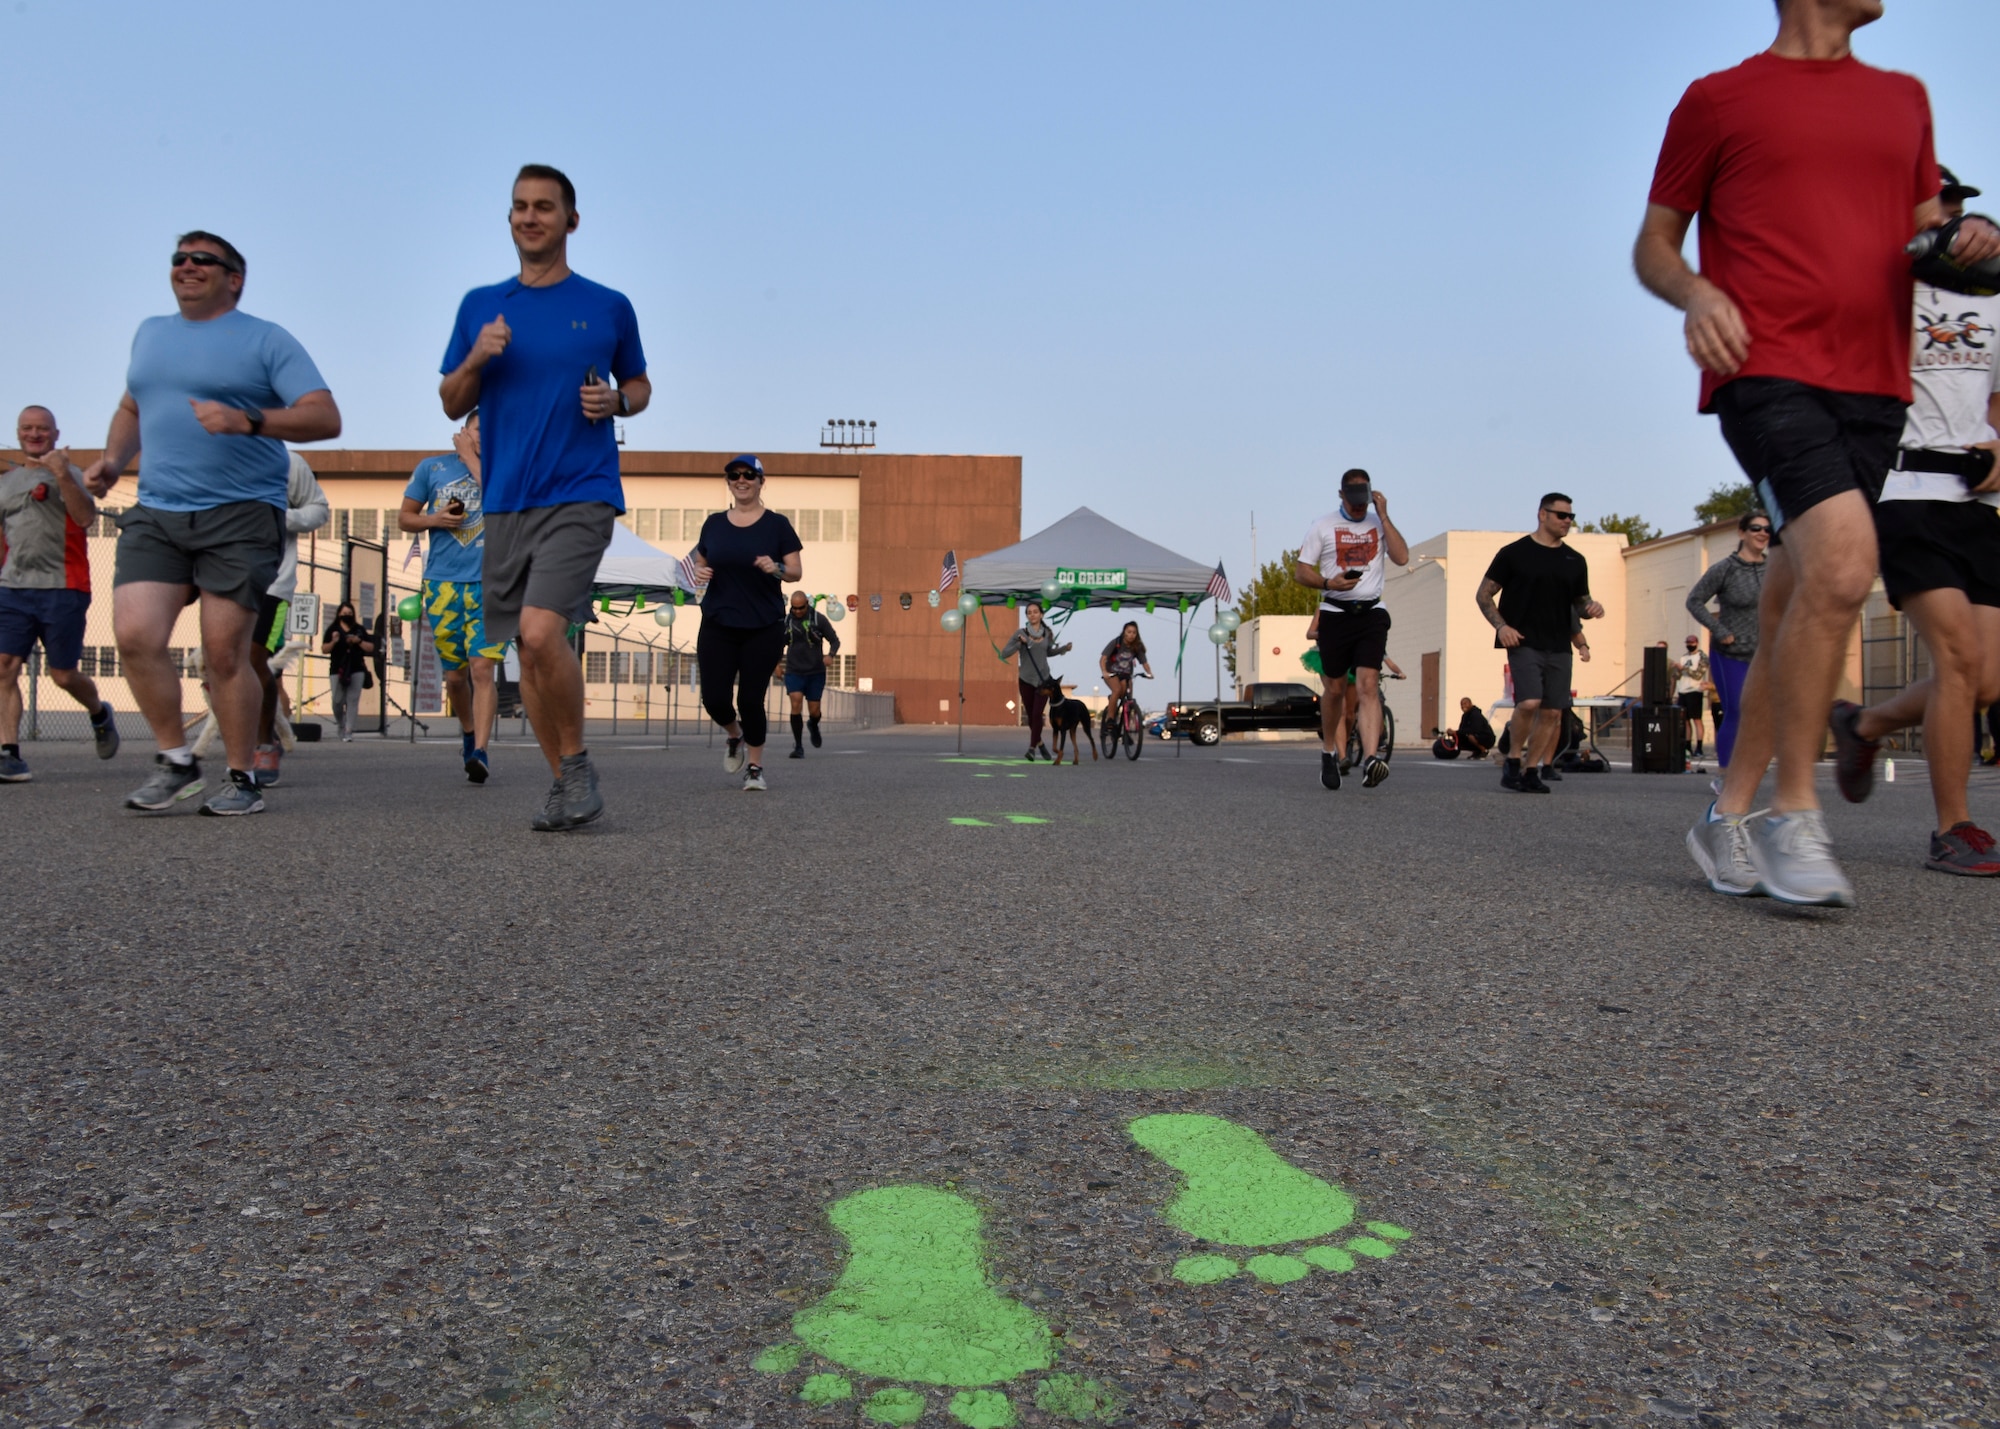 Group of people spread out and running towards green feet painted on the ground.